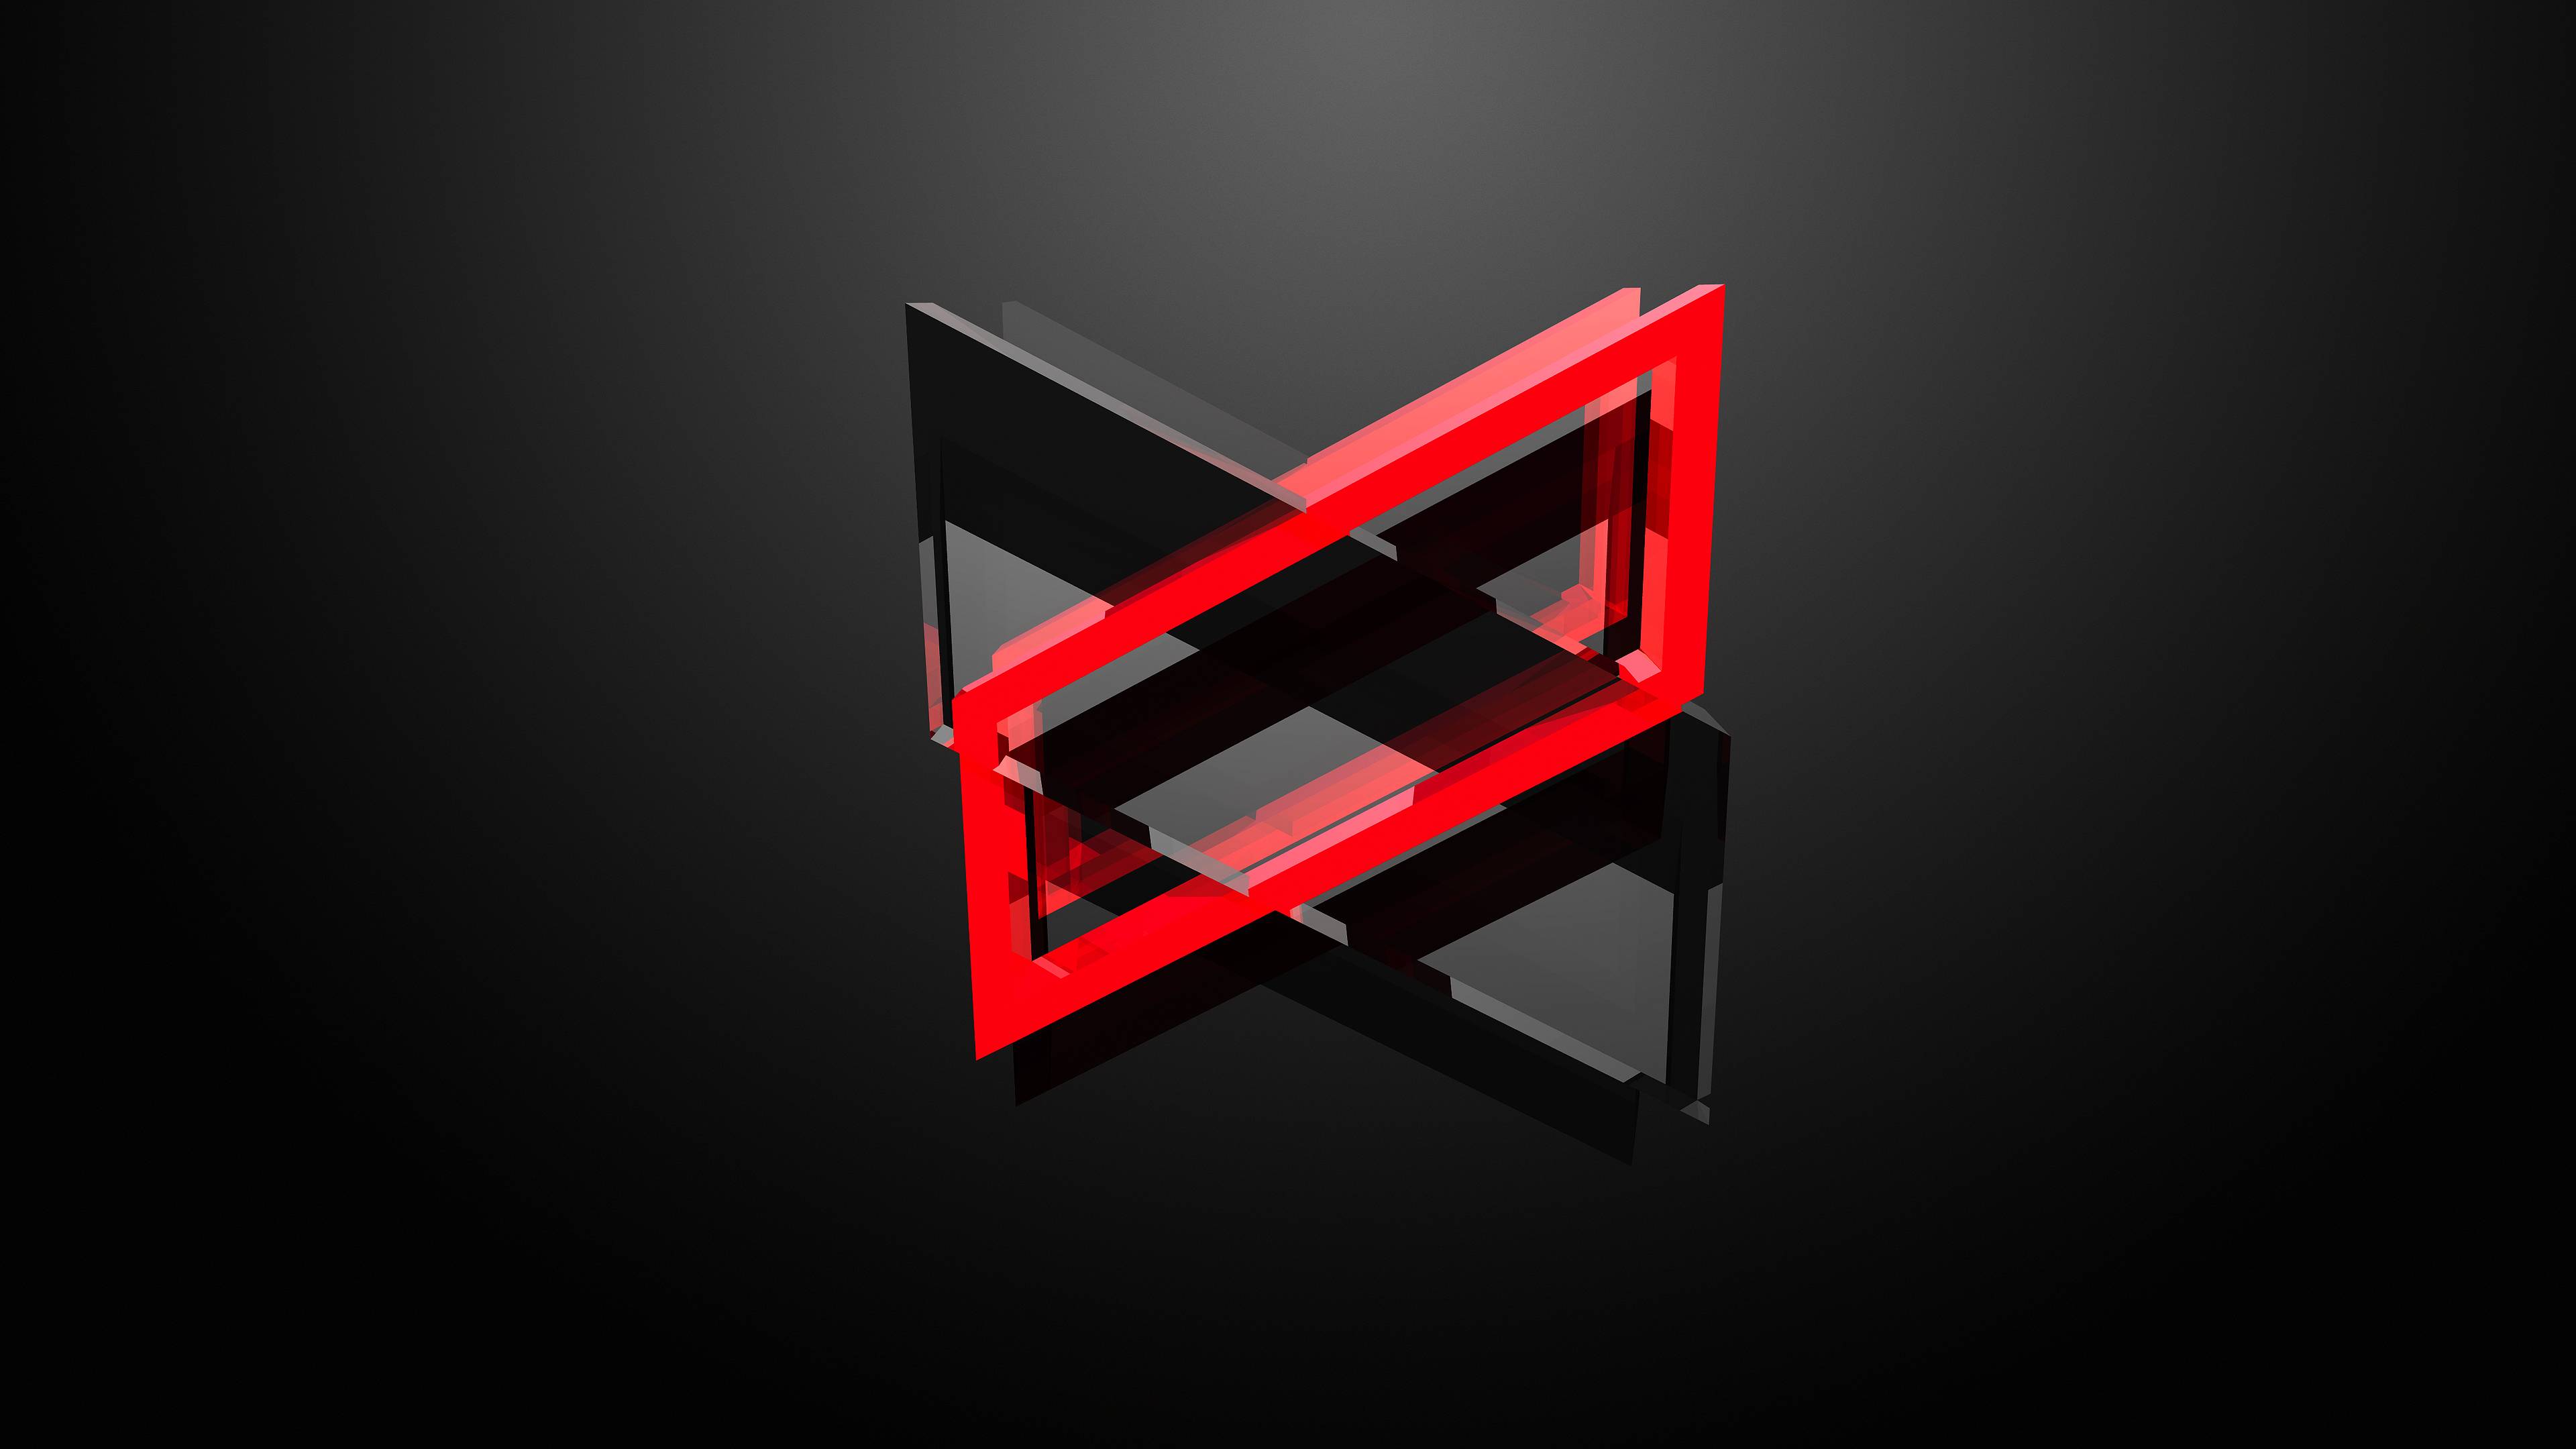 Great looking facet wallpaper in 4k Especially for you MKBHD fans i 3840x2160